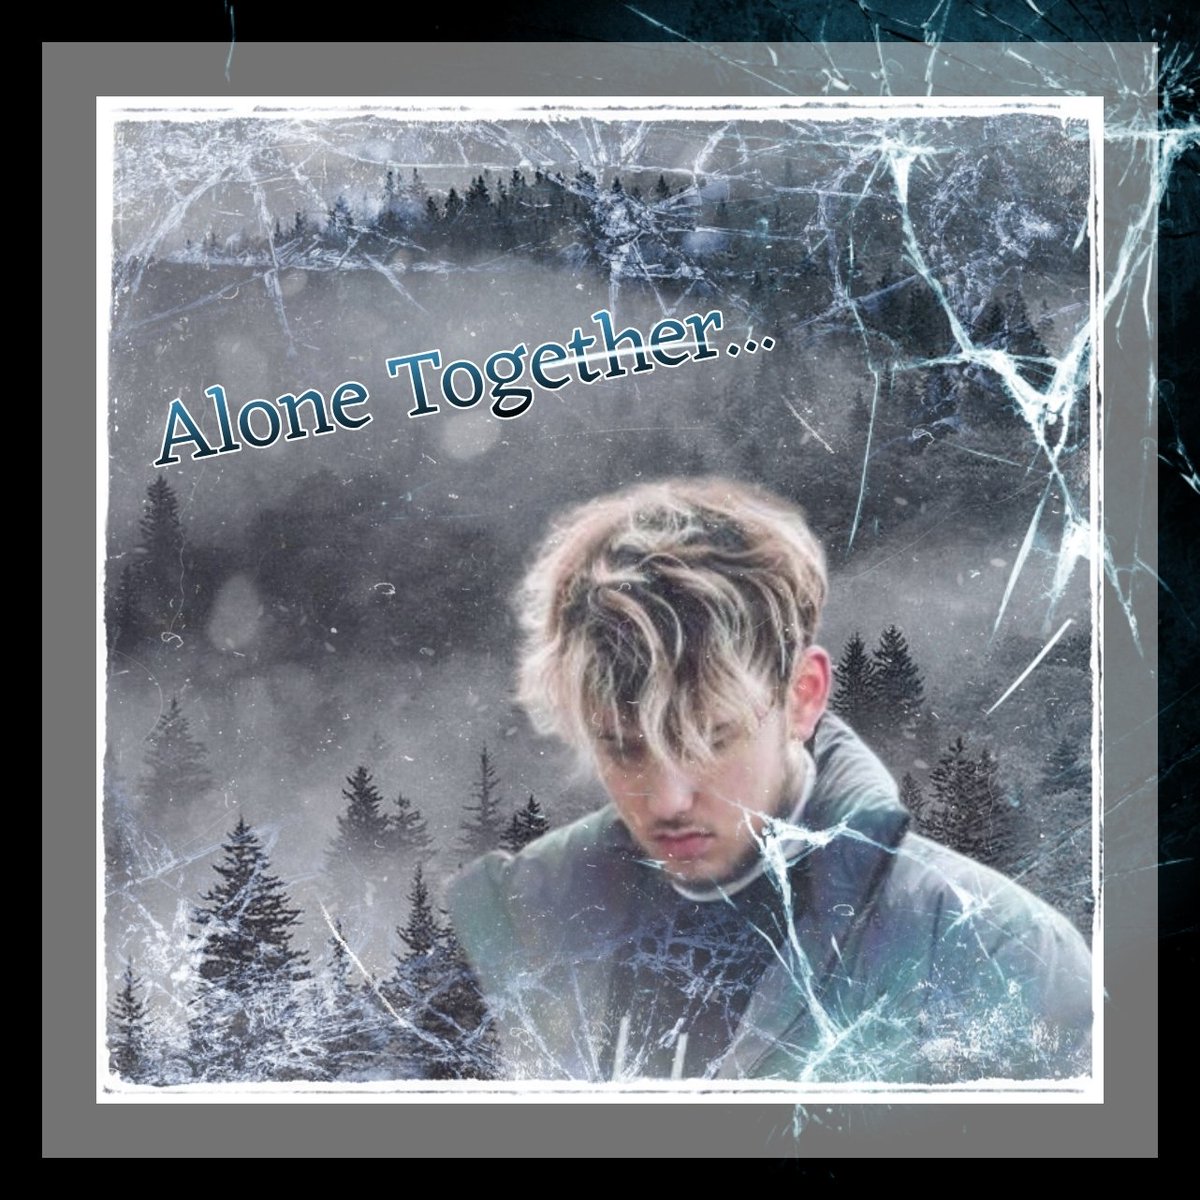 I Guess We're Alone Together... @Quadeca #AloneTogether #FMTY